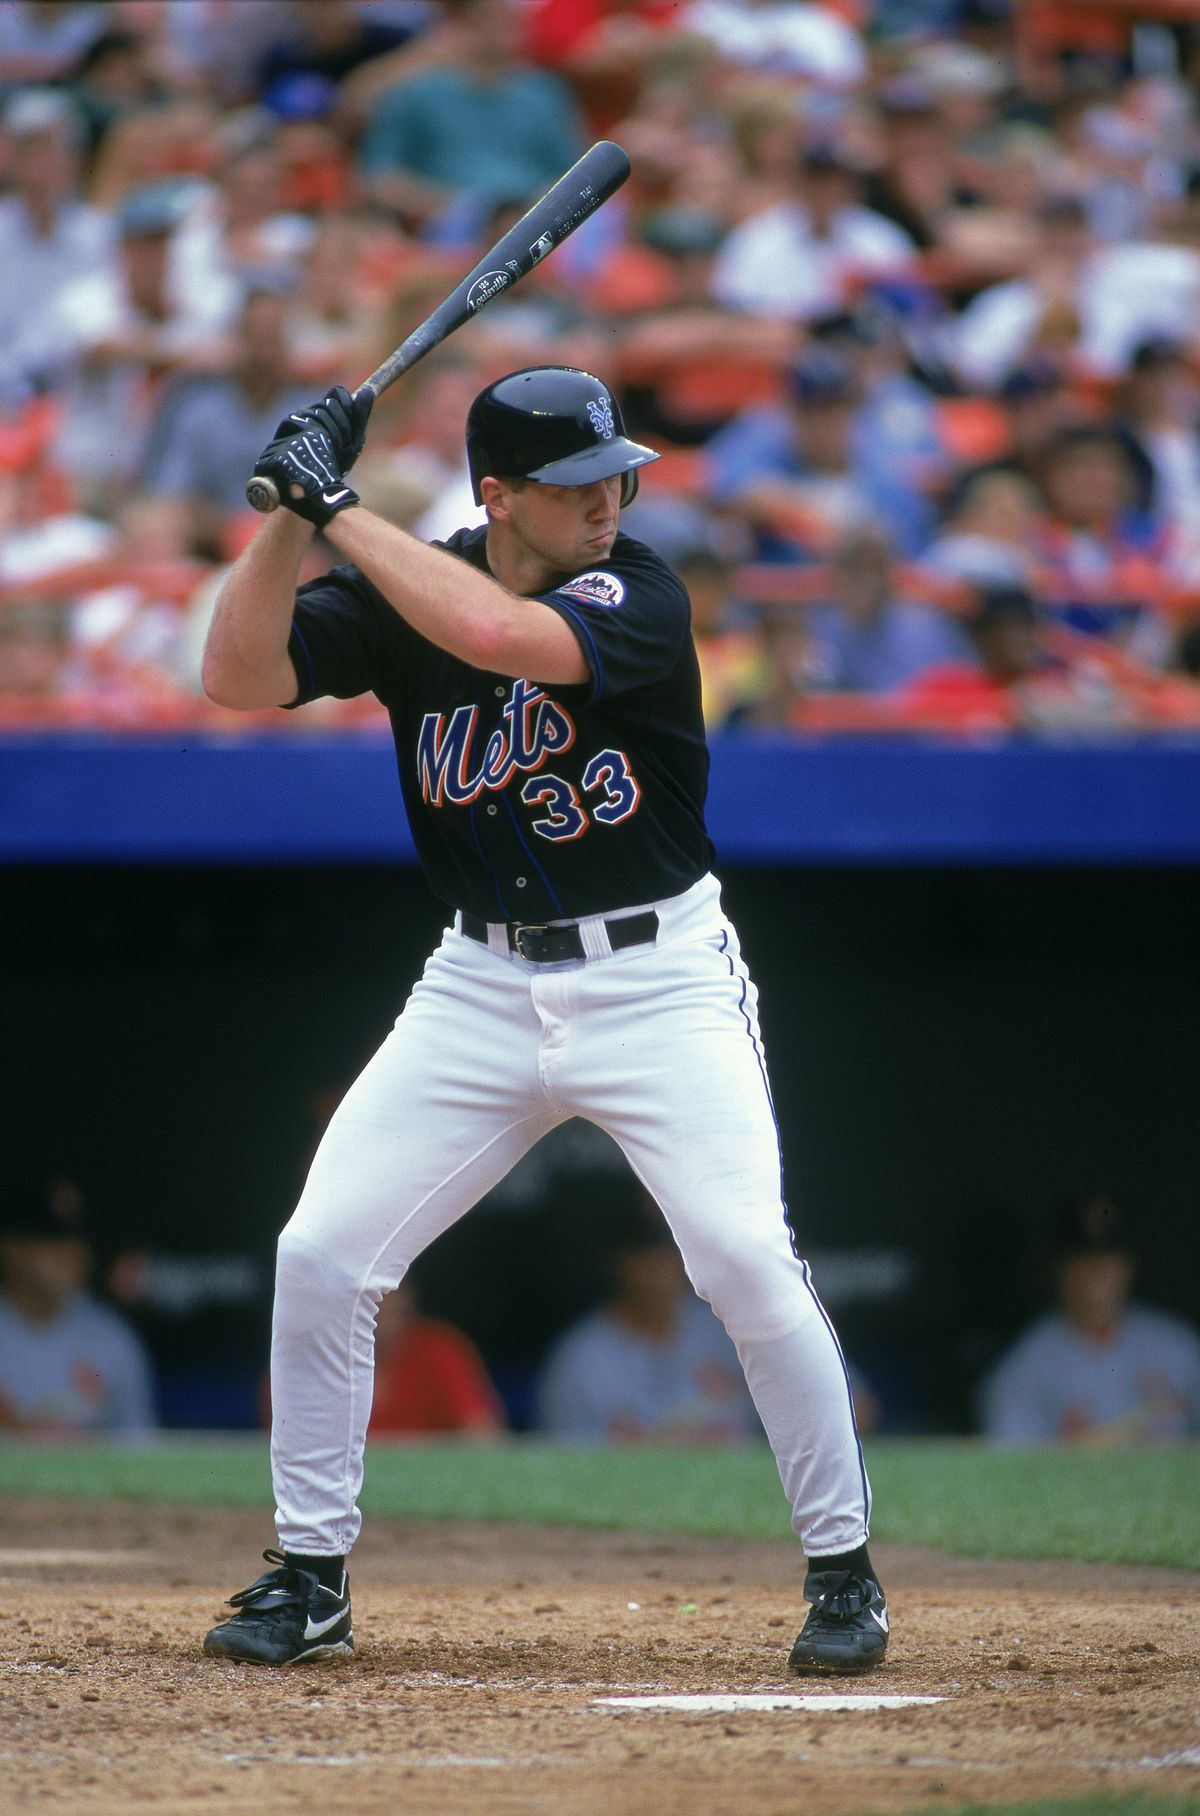 Trammell with Mets